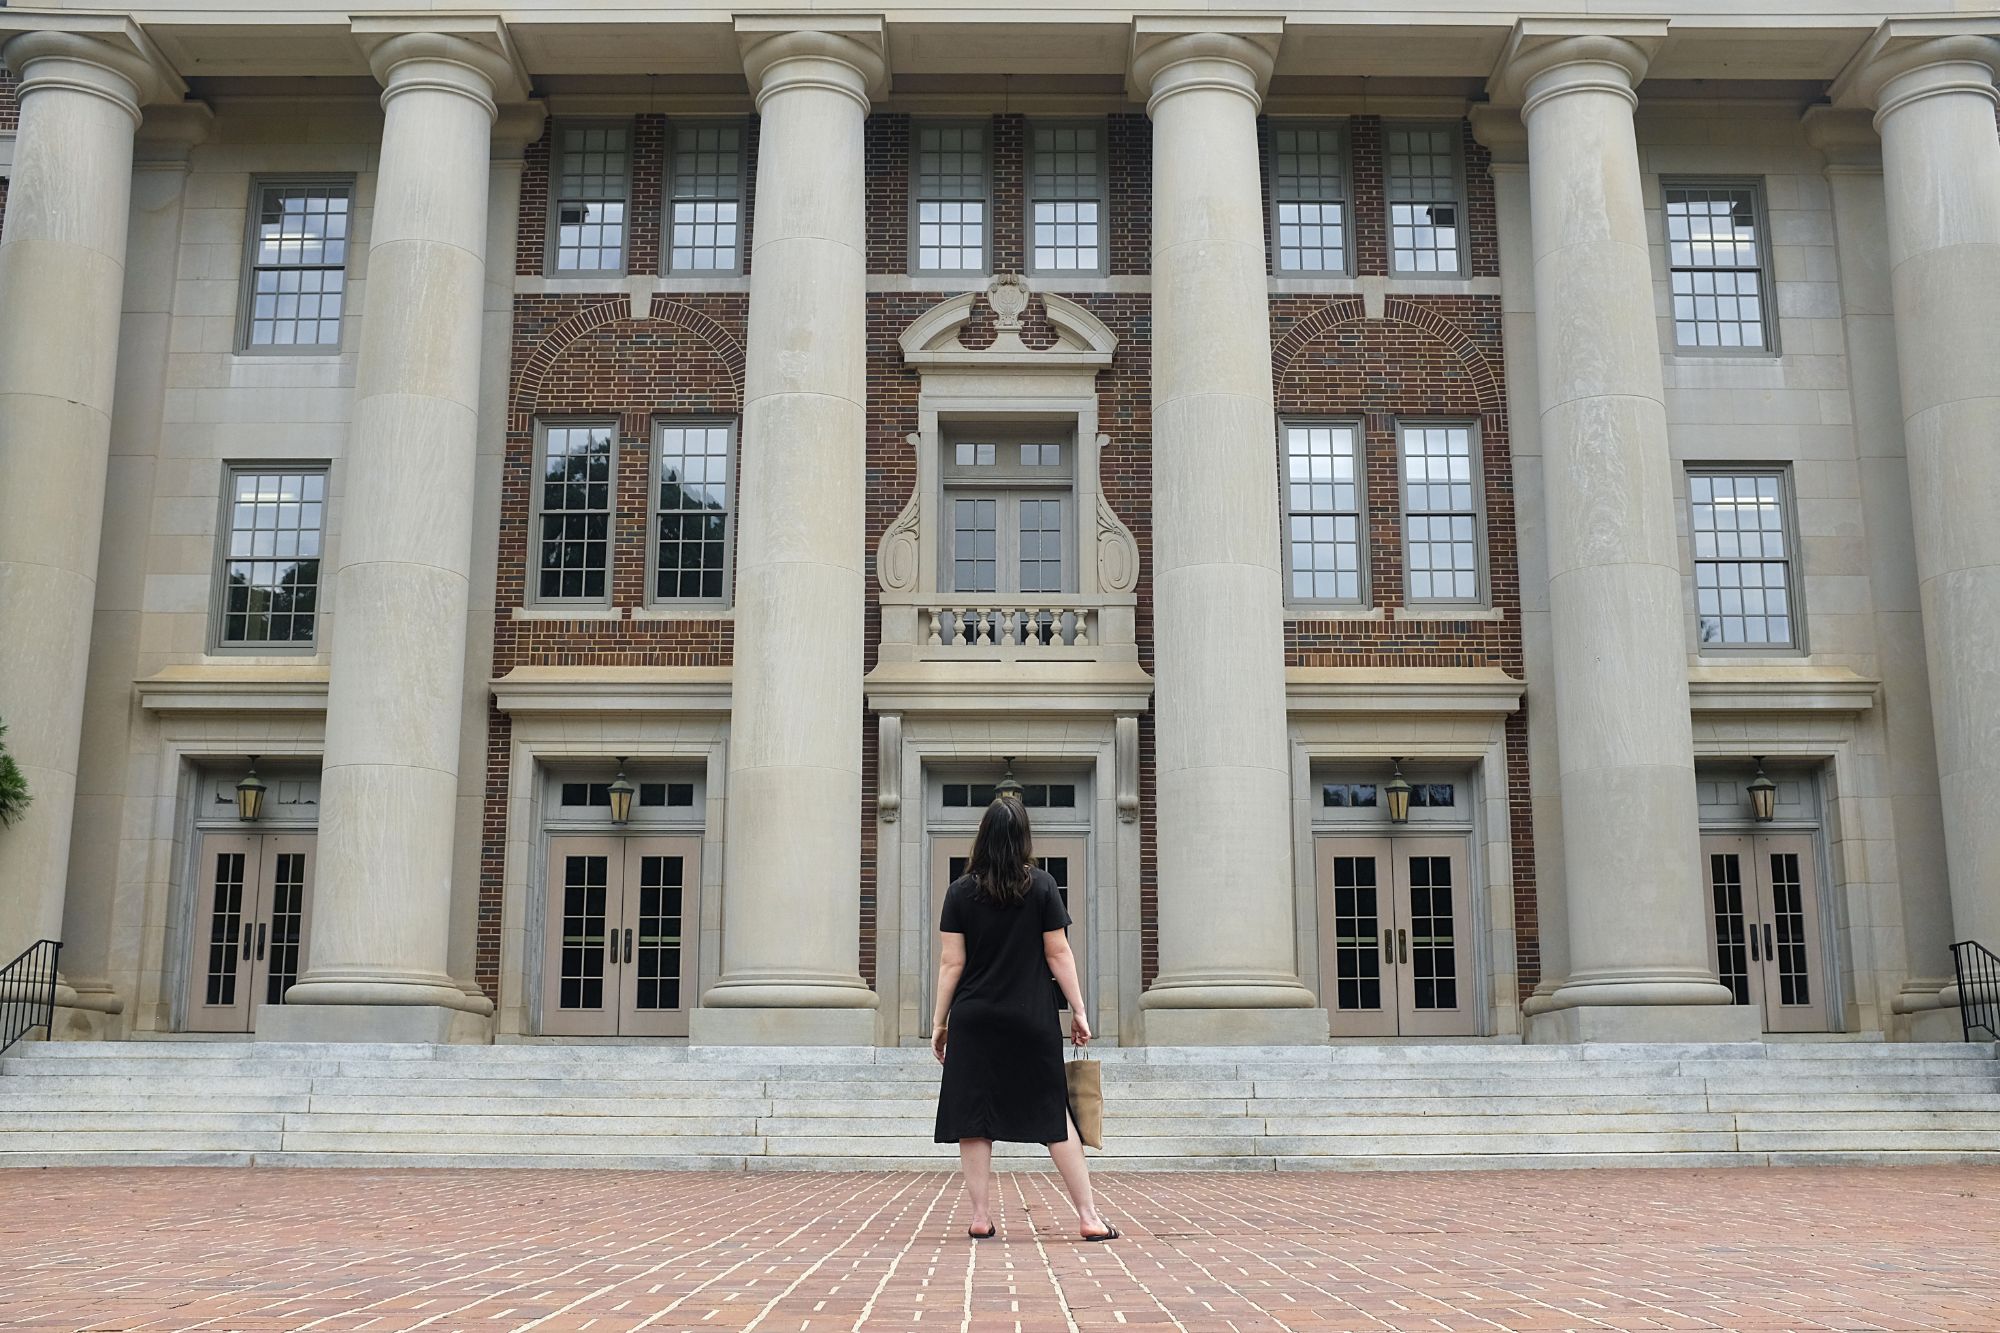 Alyssa stands in front of columns on a building on campus